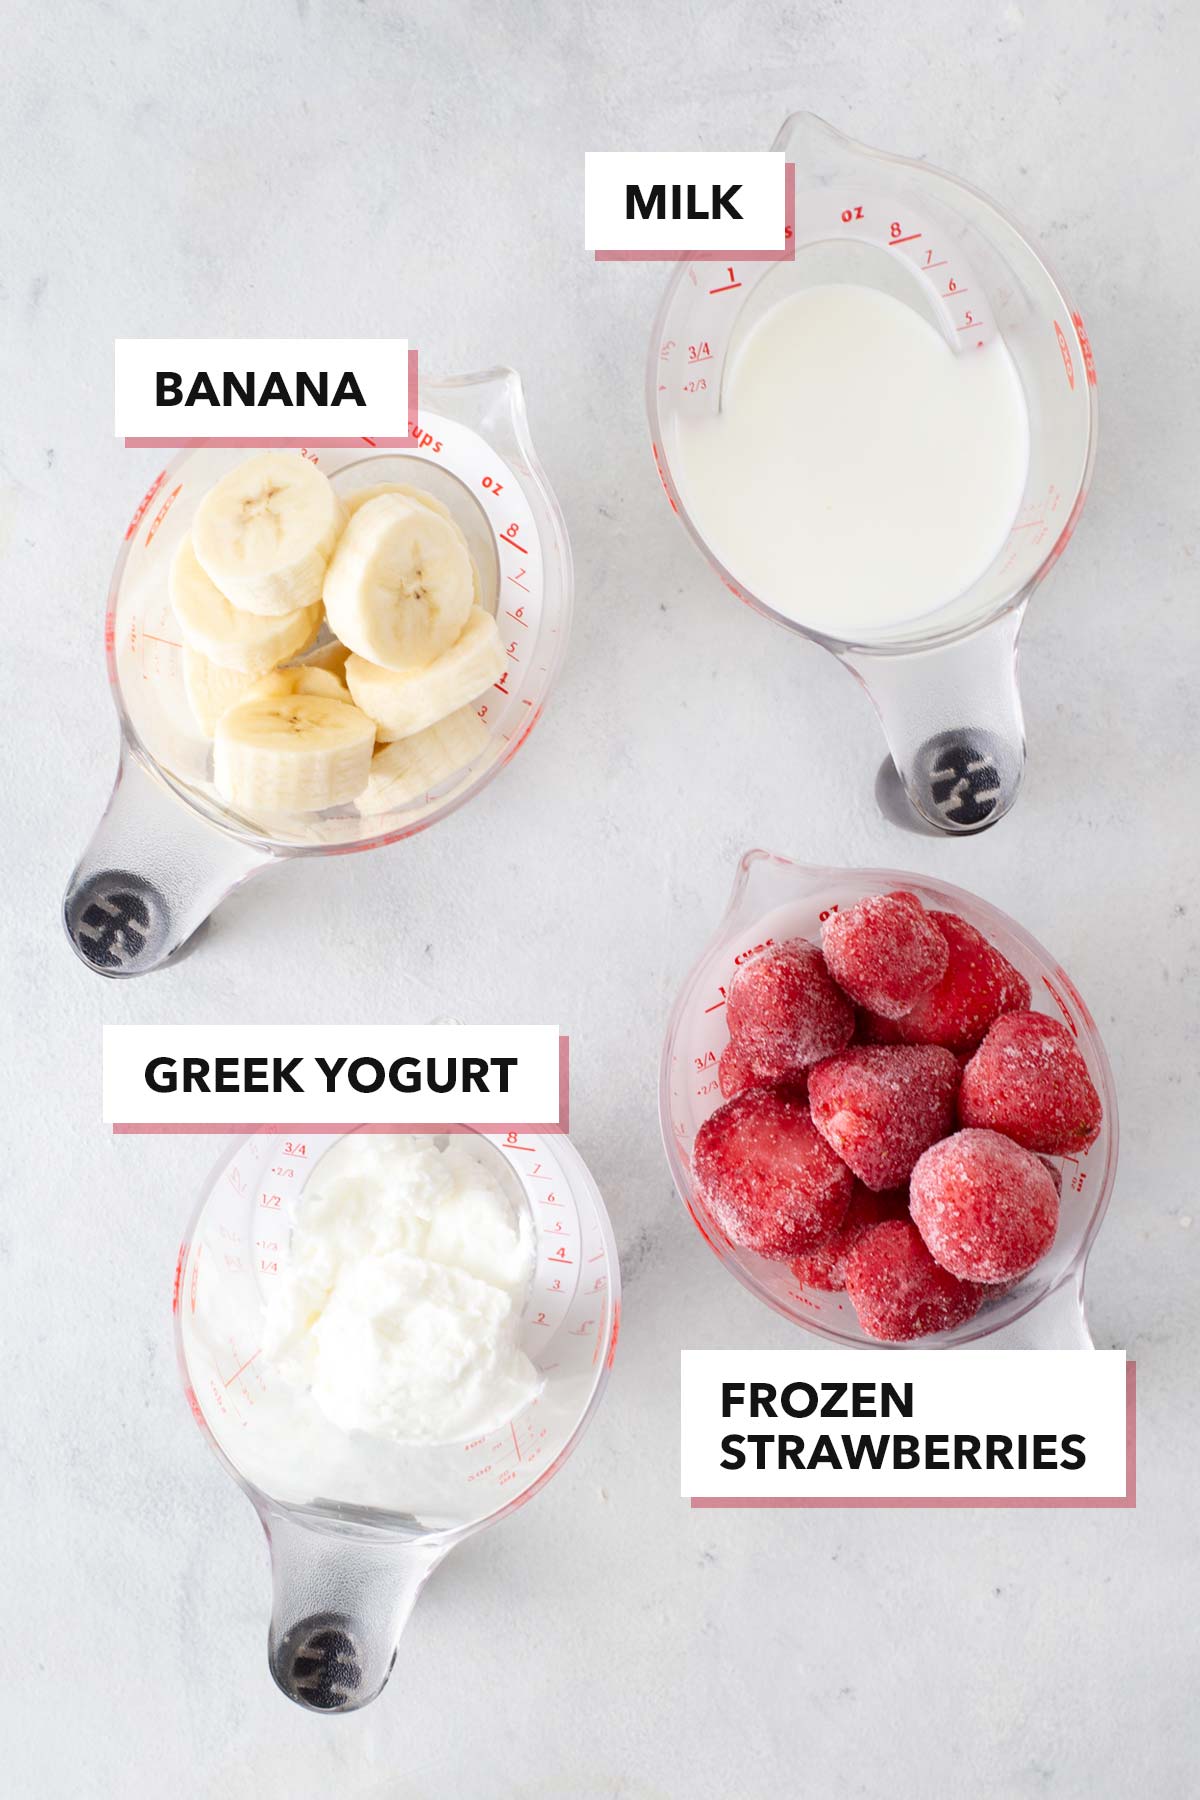 Ingredients to make a Strawberry banana smoothie on a table.